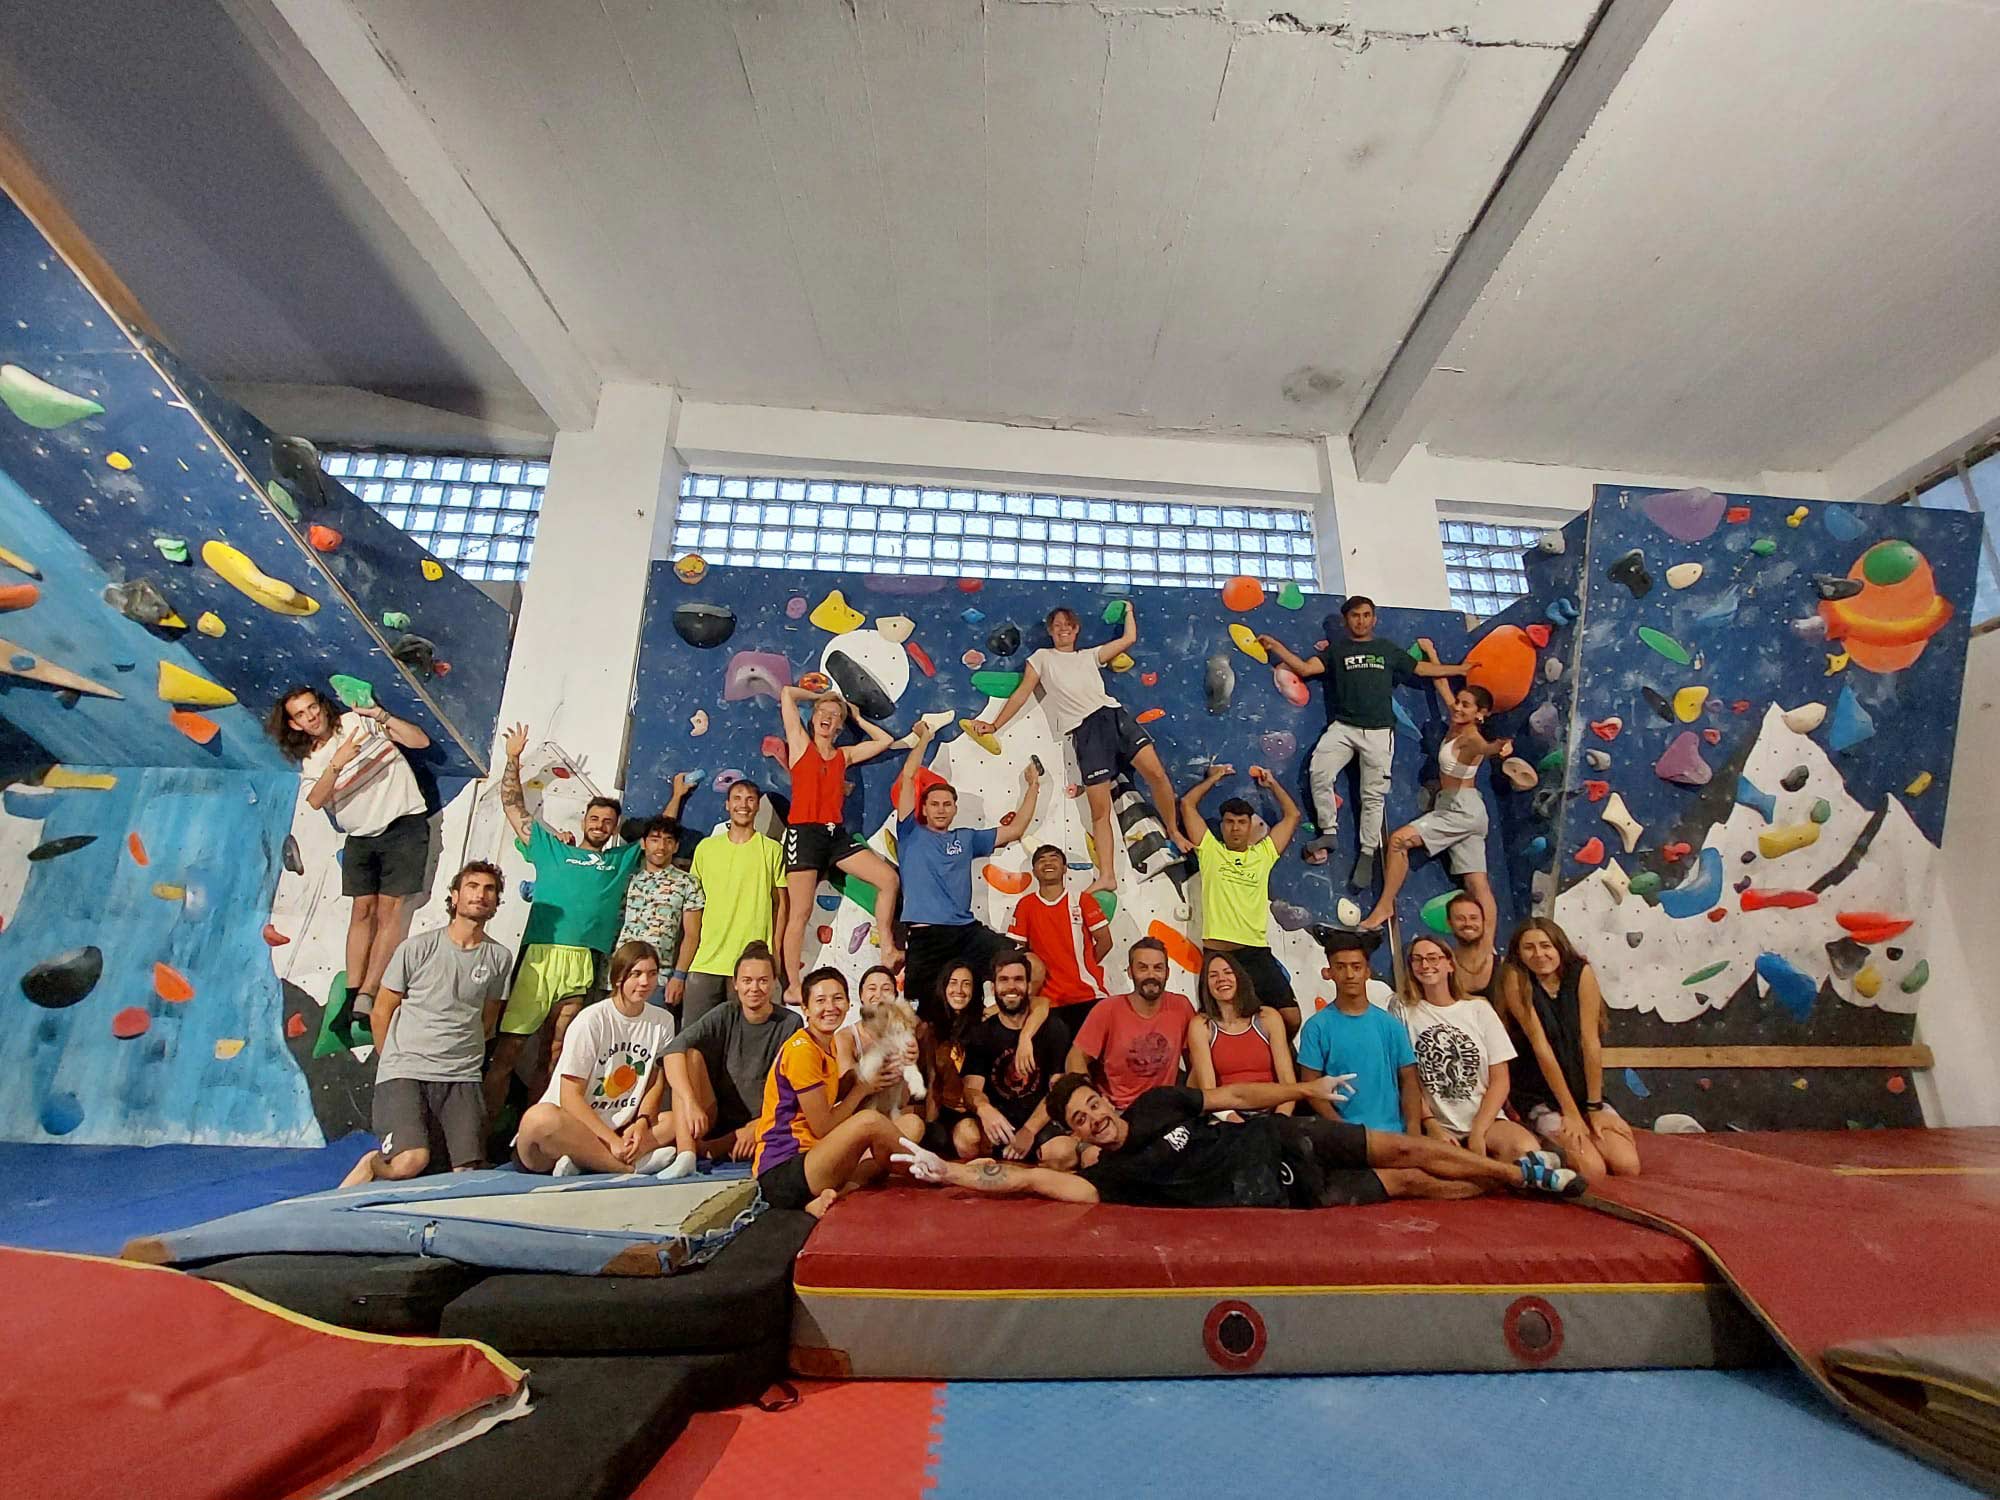 Climbing to the top - Yoga and Sport with Refugees